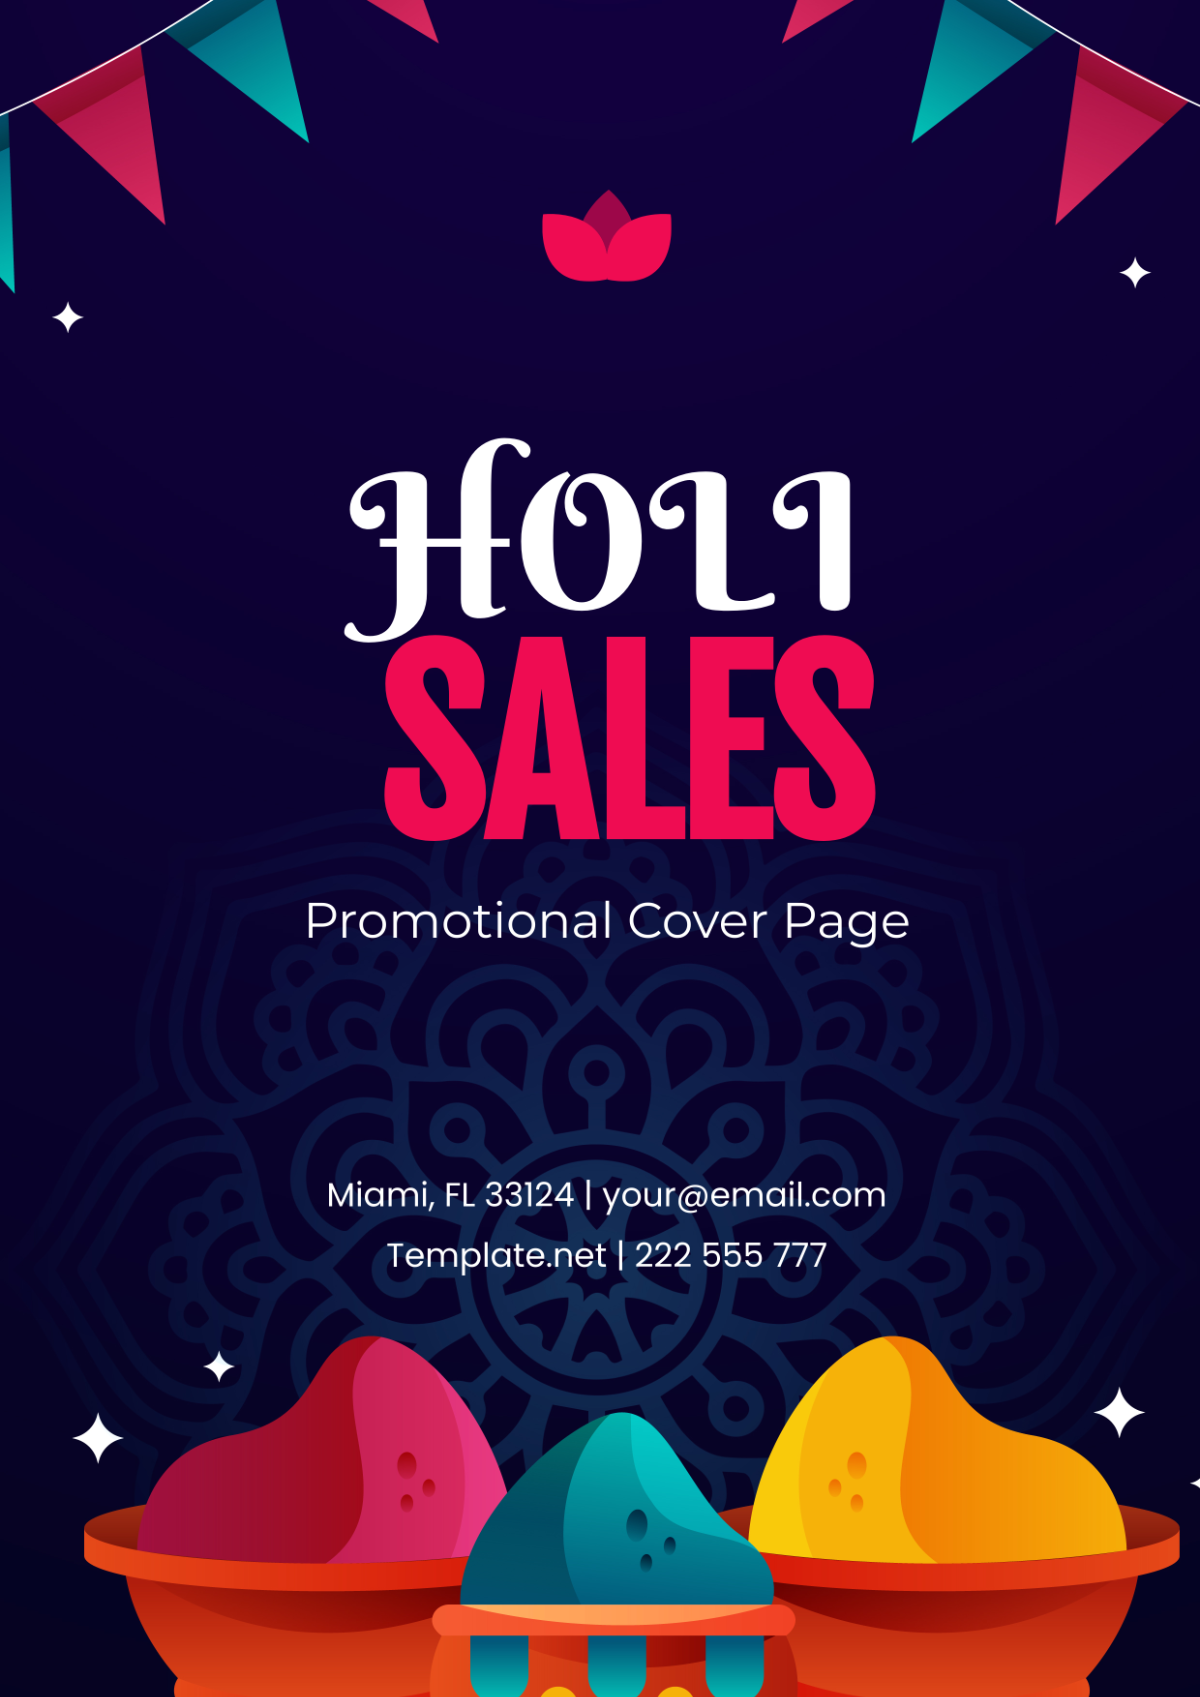 Holi Sales Promotional Cover Page